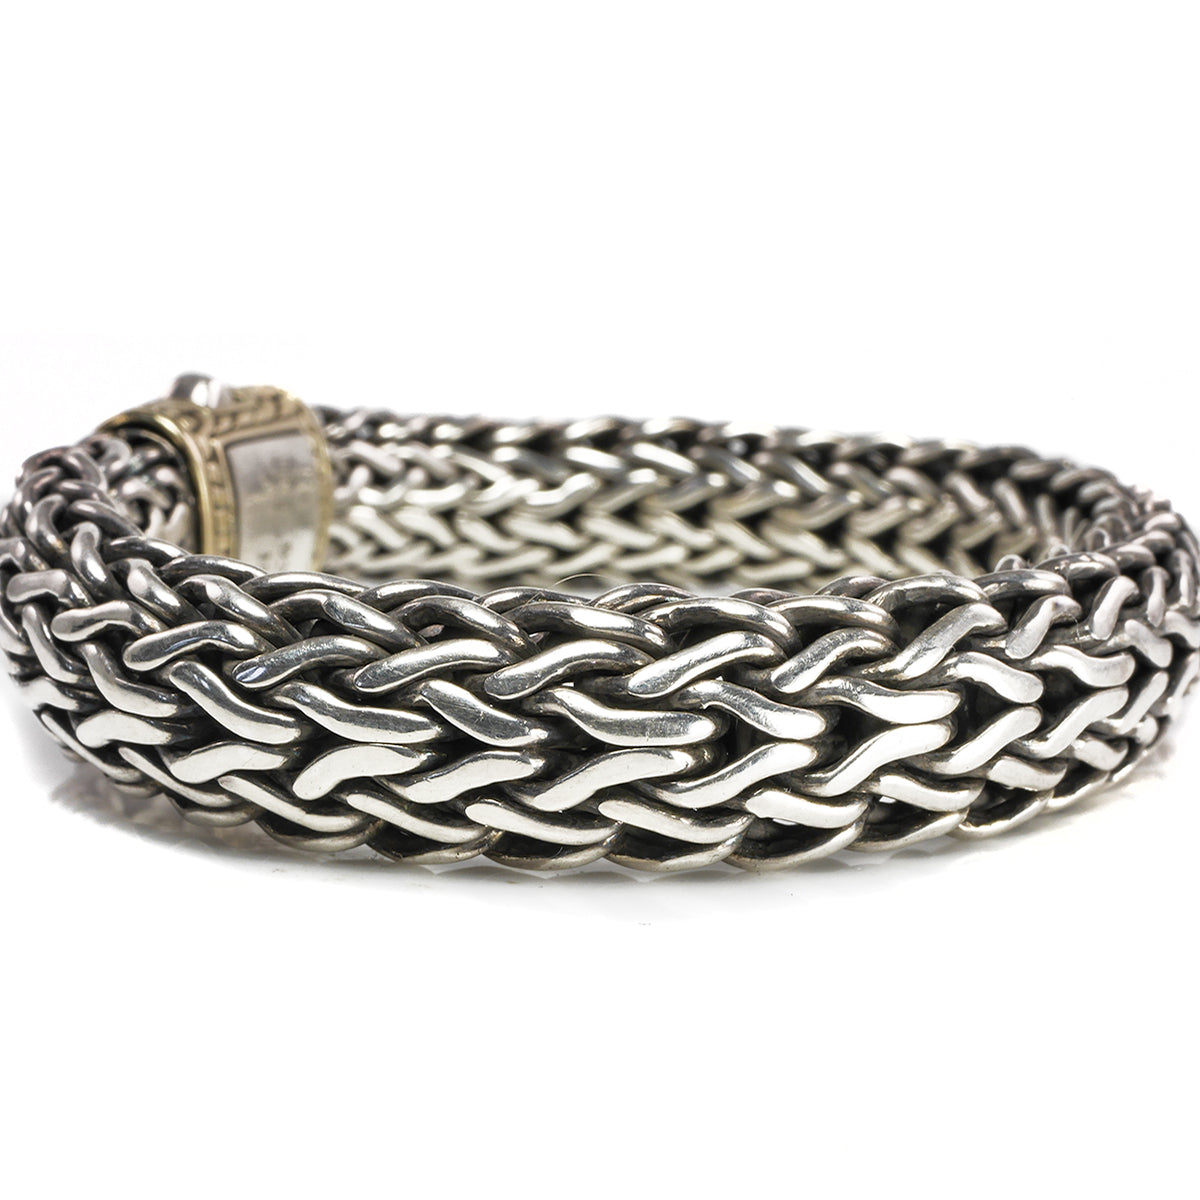 Great Lakes Boutique John Hardy Classic Silver Woven Bracelet with Gold Clasp